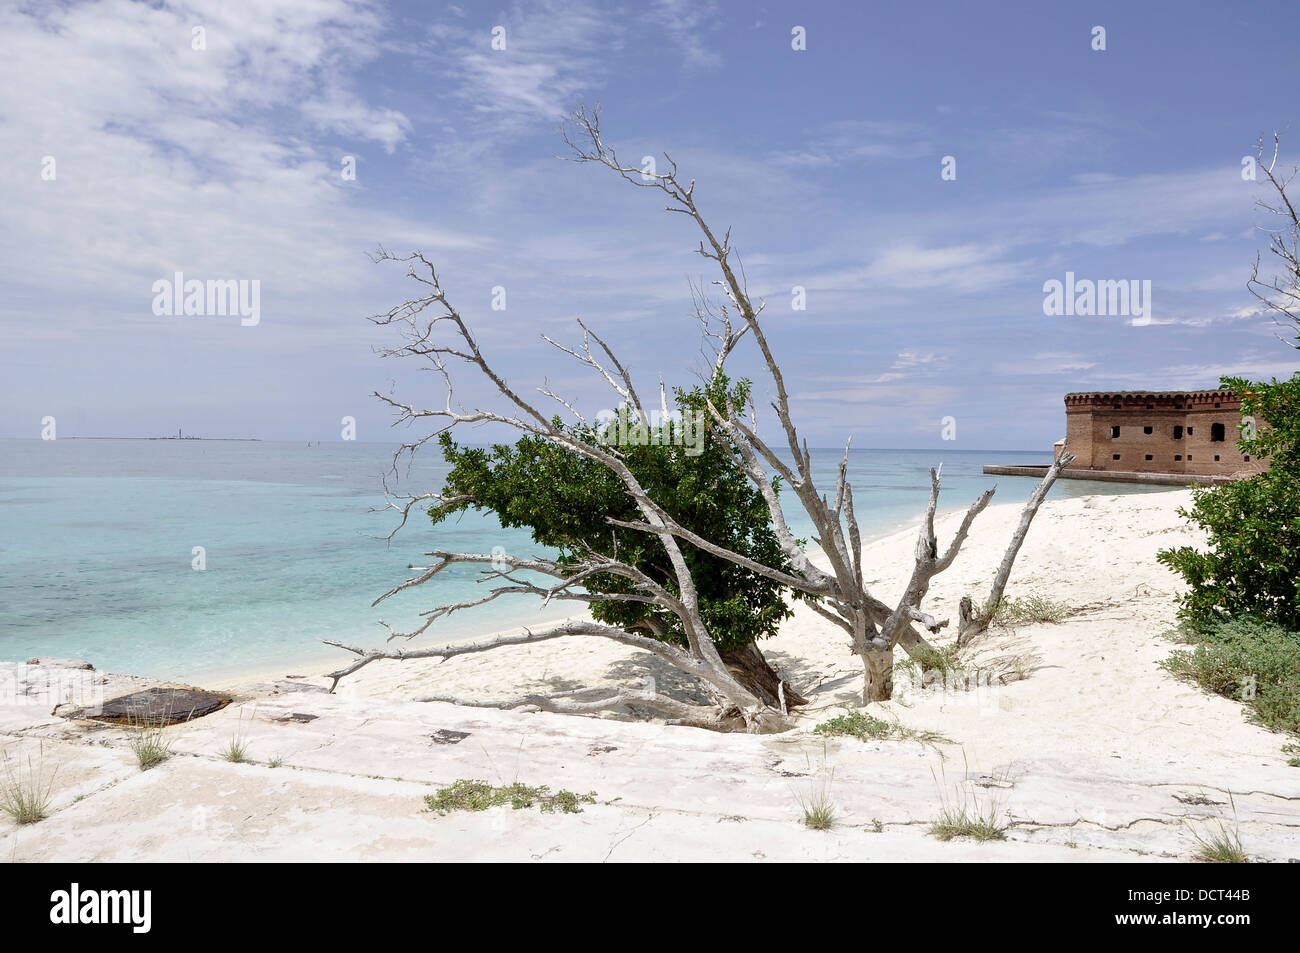 Dead tree on the beach at Fort Jefferson, Dry Tortuga, Florida Stock Photo